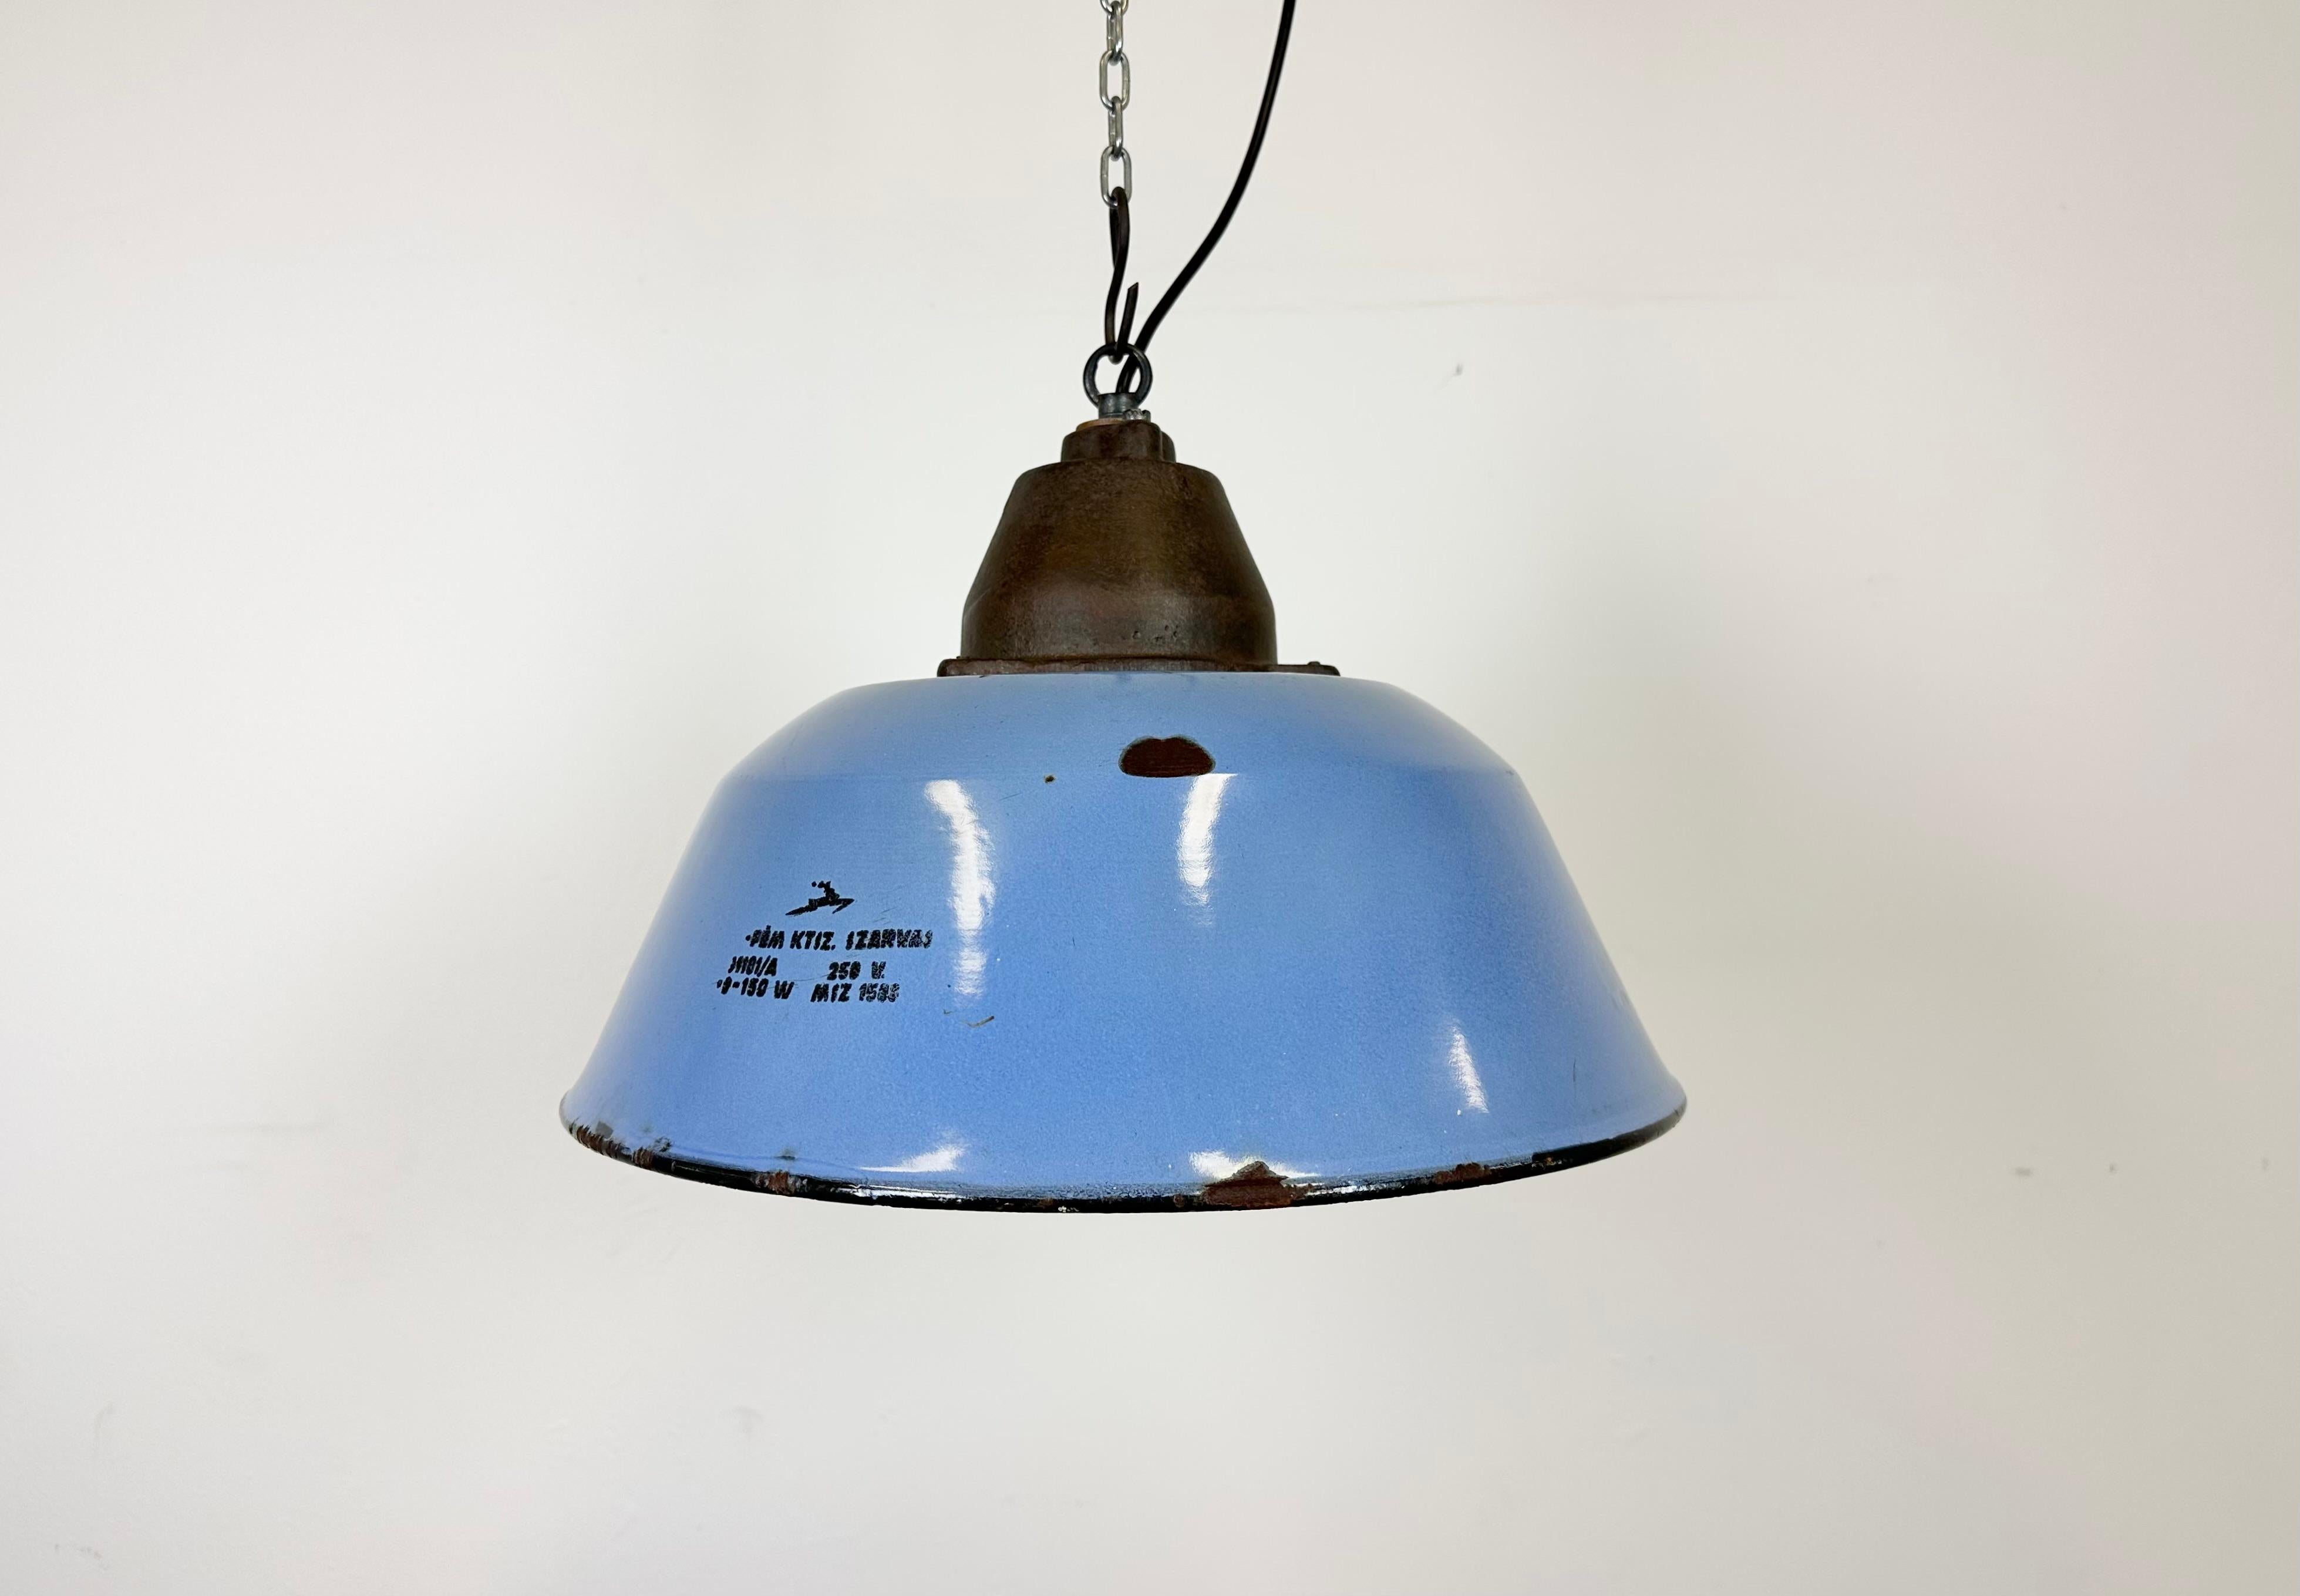 Industrial hanging lamp manufactured by Szarvasi Vas - Fém in Hungary during the 1960s. It features a blue enamel shade, white enamel interior and a cast iron top. New porcelain socket requires E 27/ E26 light bulbs. New wire. The diameter of the